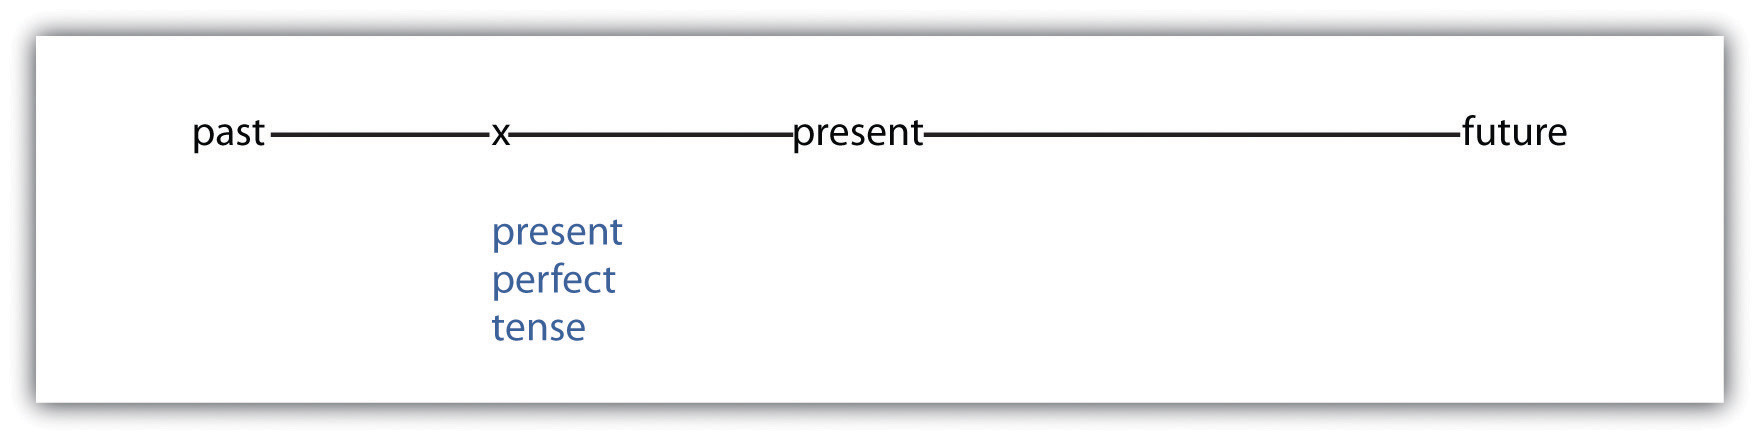 The past perfect tense has a connection with the past and the present.